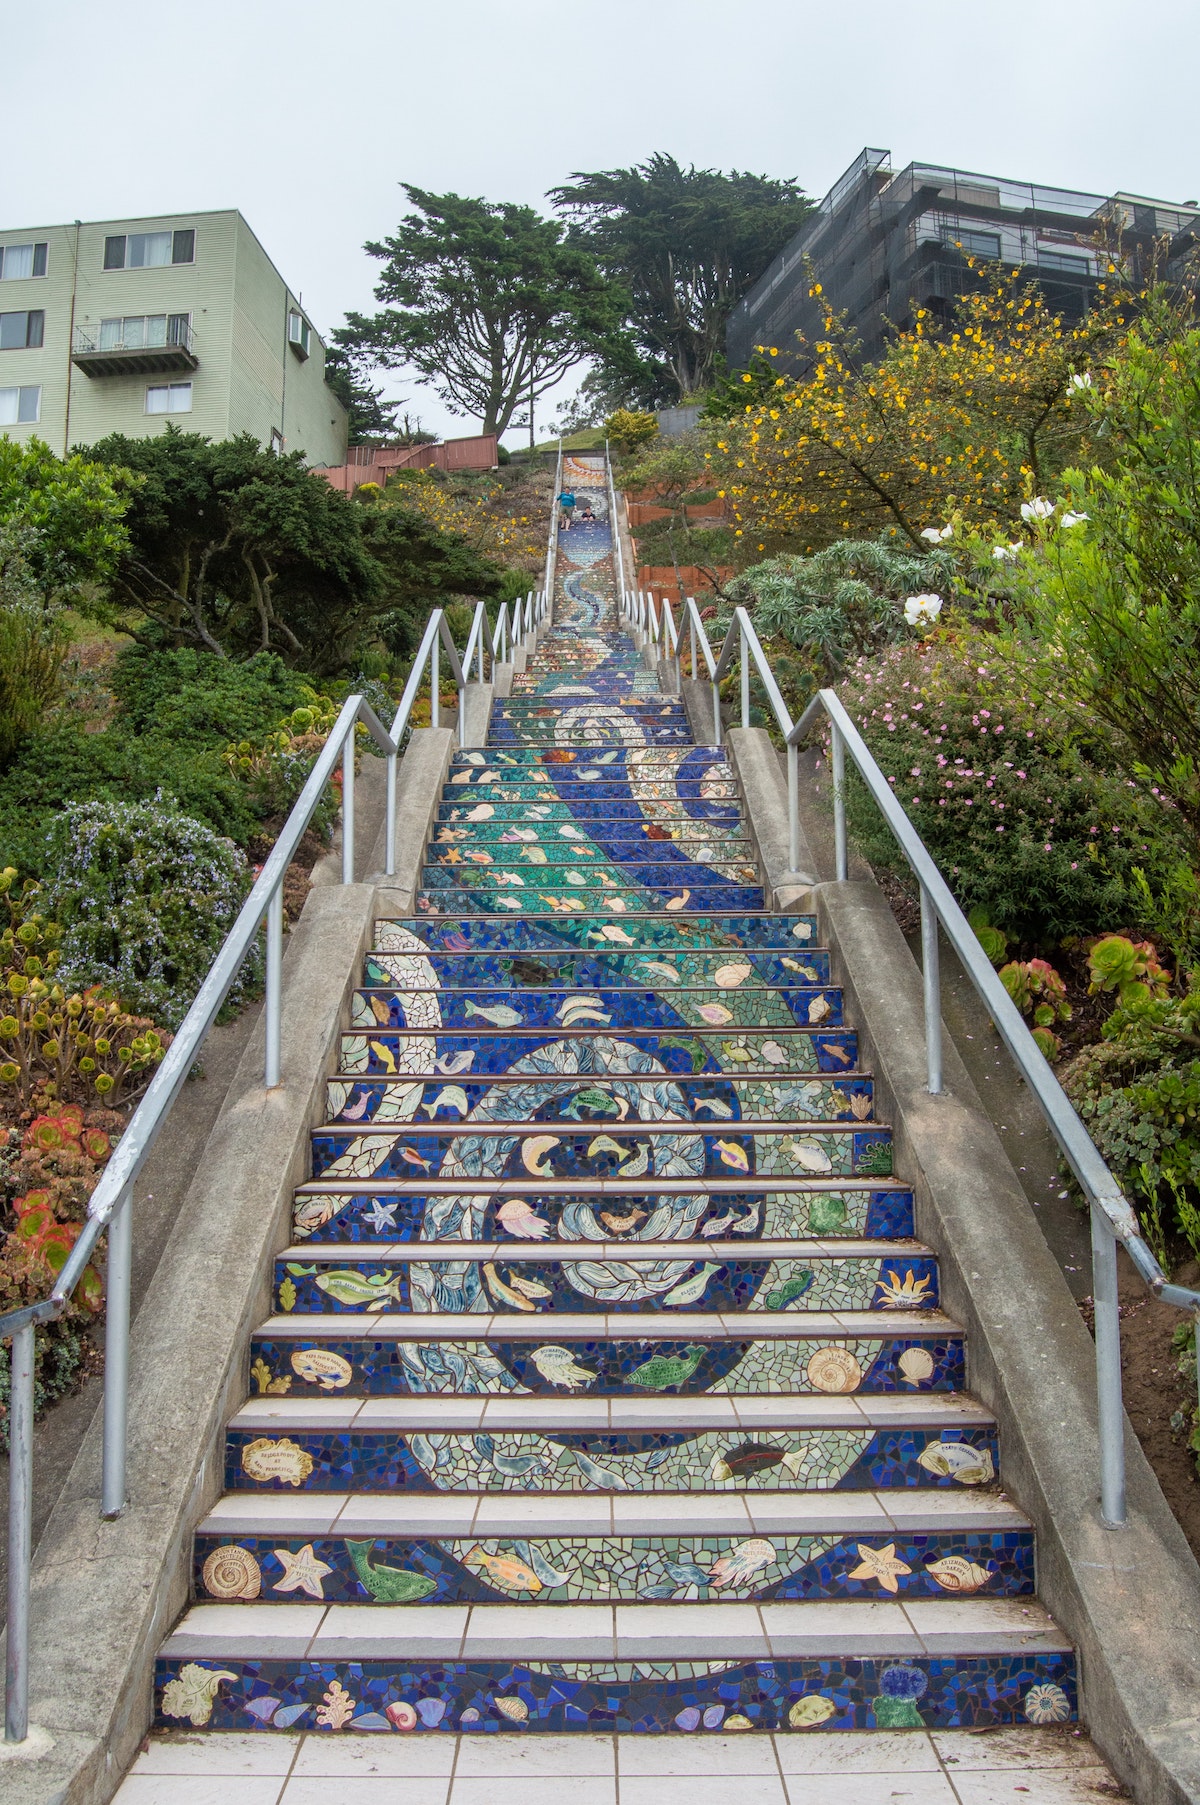 The 16th Avenue tiled steps in San Francisco are decorated with an intricate mosaic of underwater motifs with blue, green, and white tiles